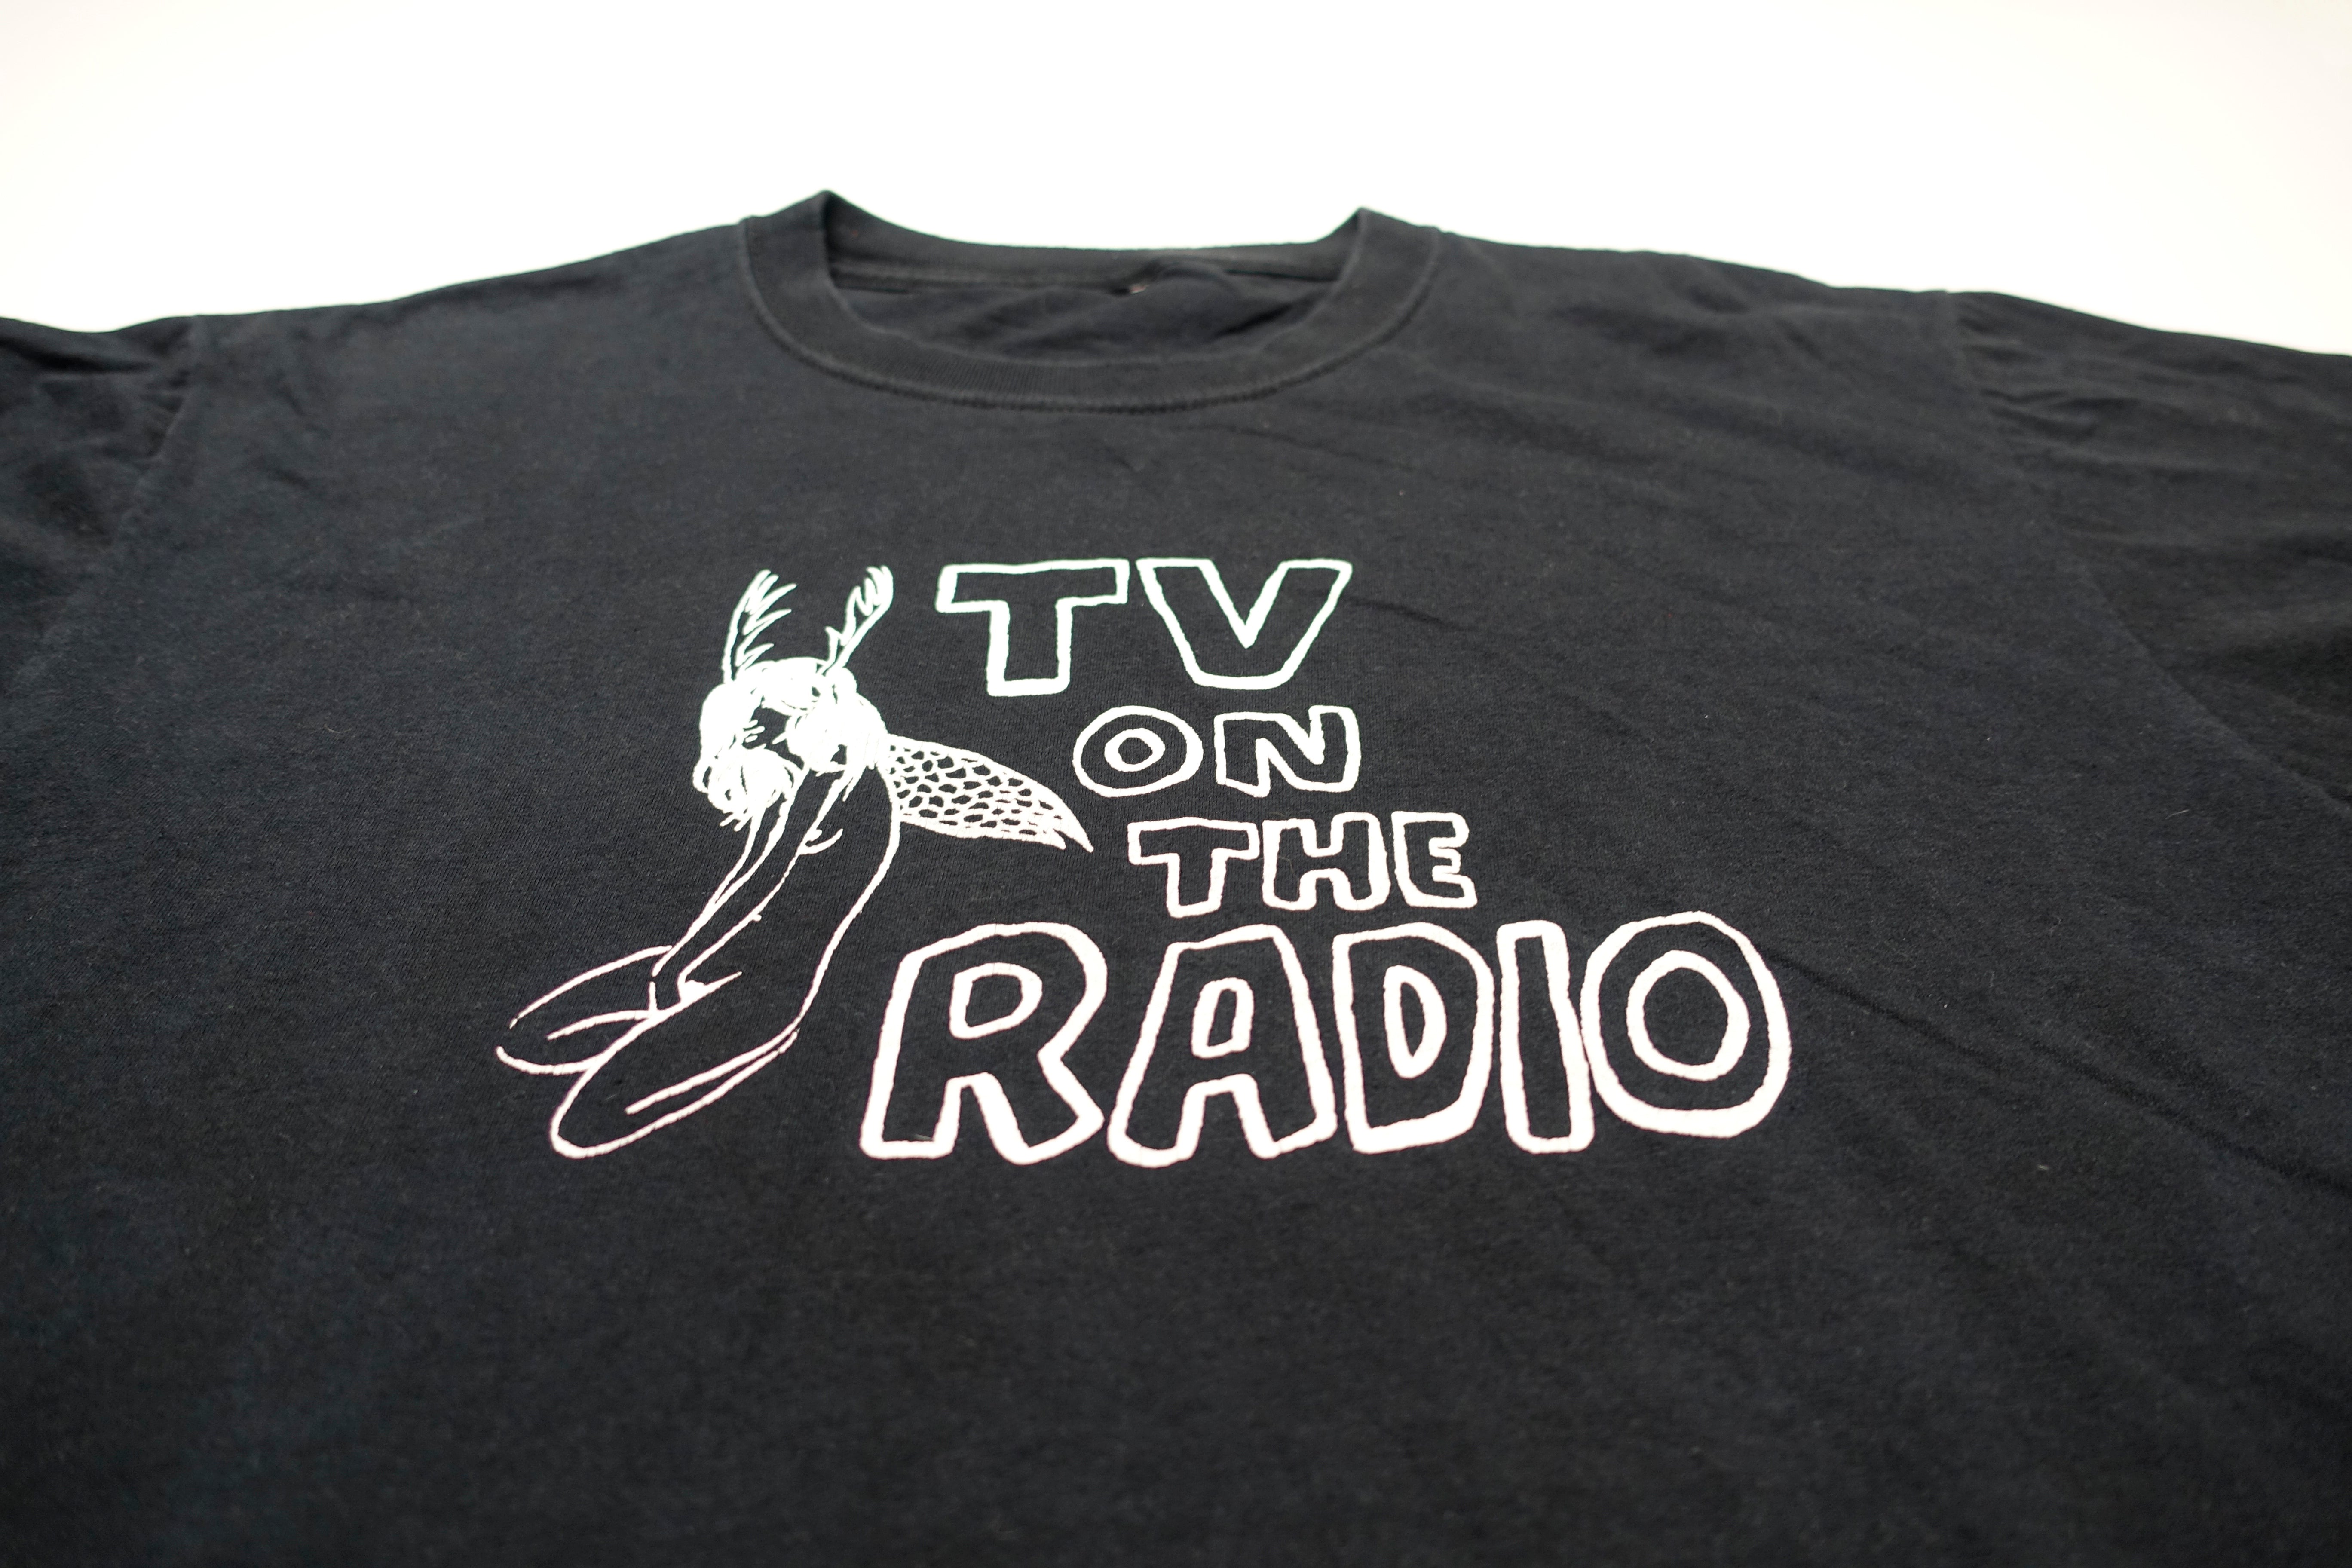 TV On The Radio - Fairy w/ Antlers Hollywood Bowl 2011 Tour Shirt Size Large (Maybe Bootleg?)